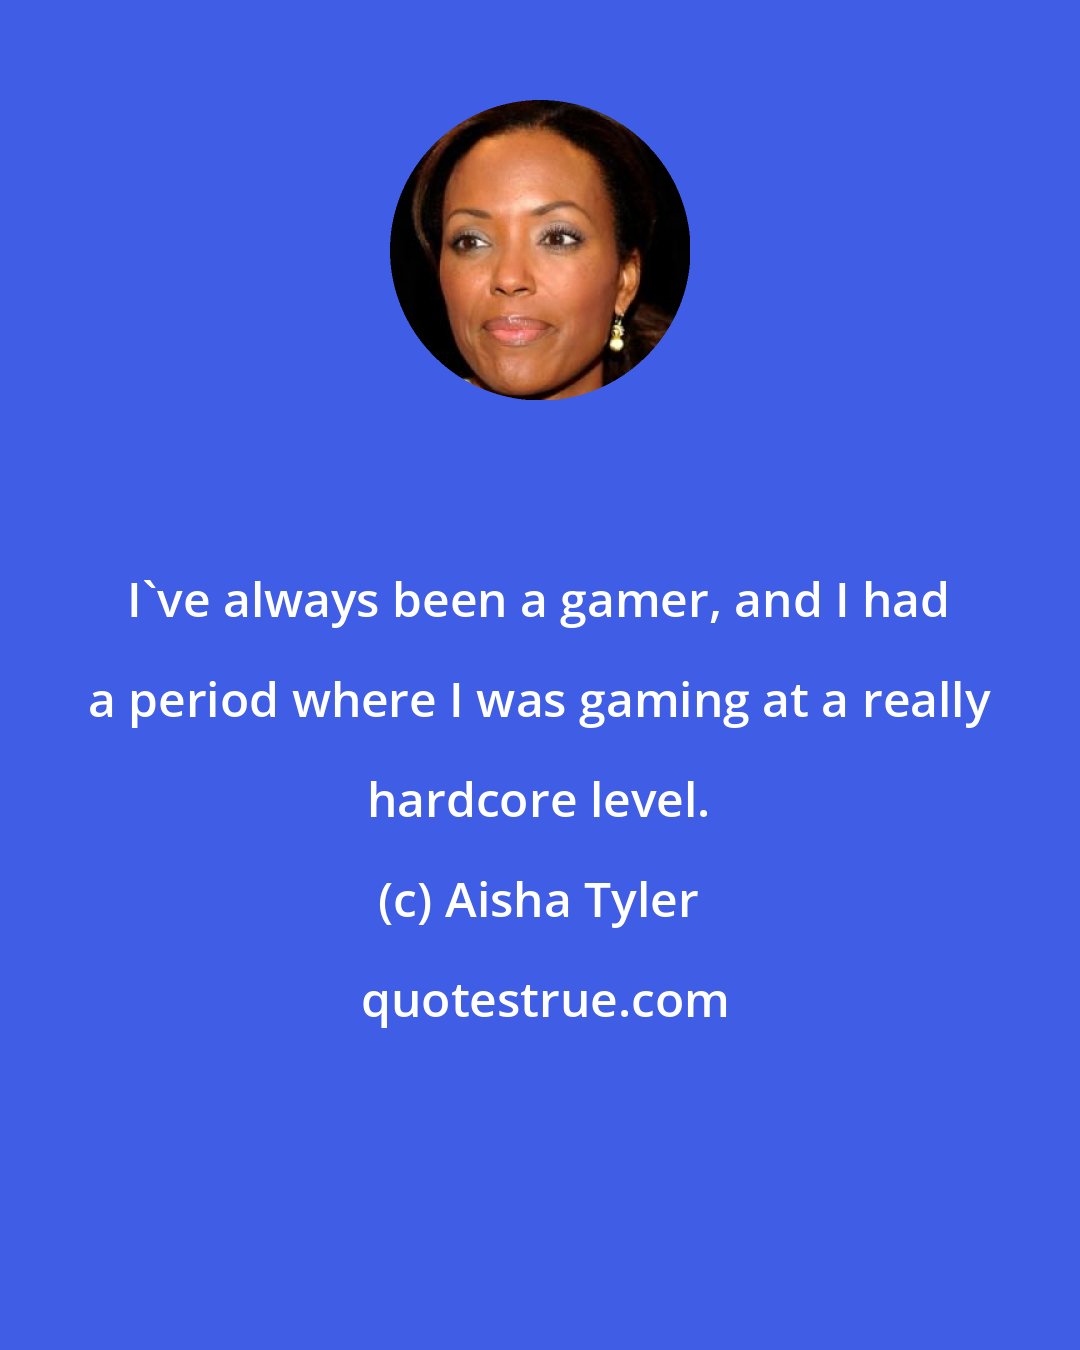 Aisha Tyler: I've always been a gamer, and I had a period where I was gaming at a really hardcore level.